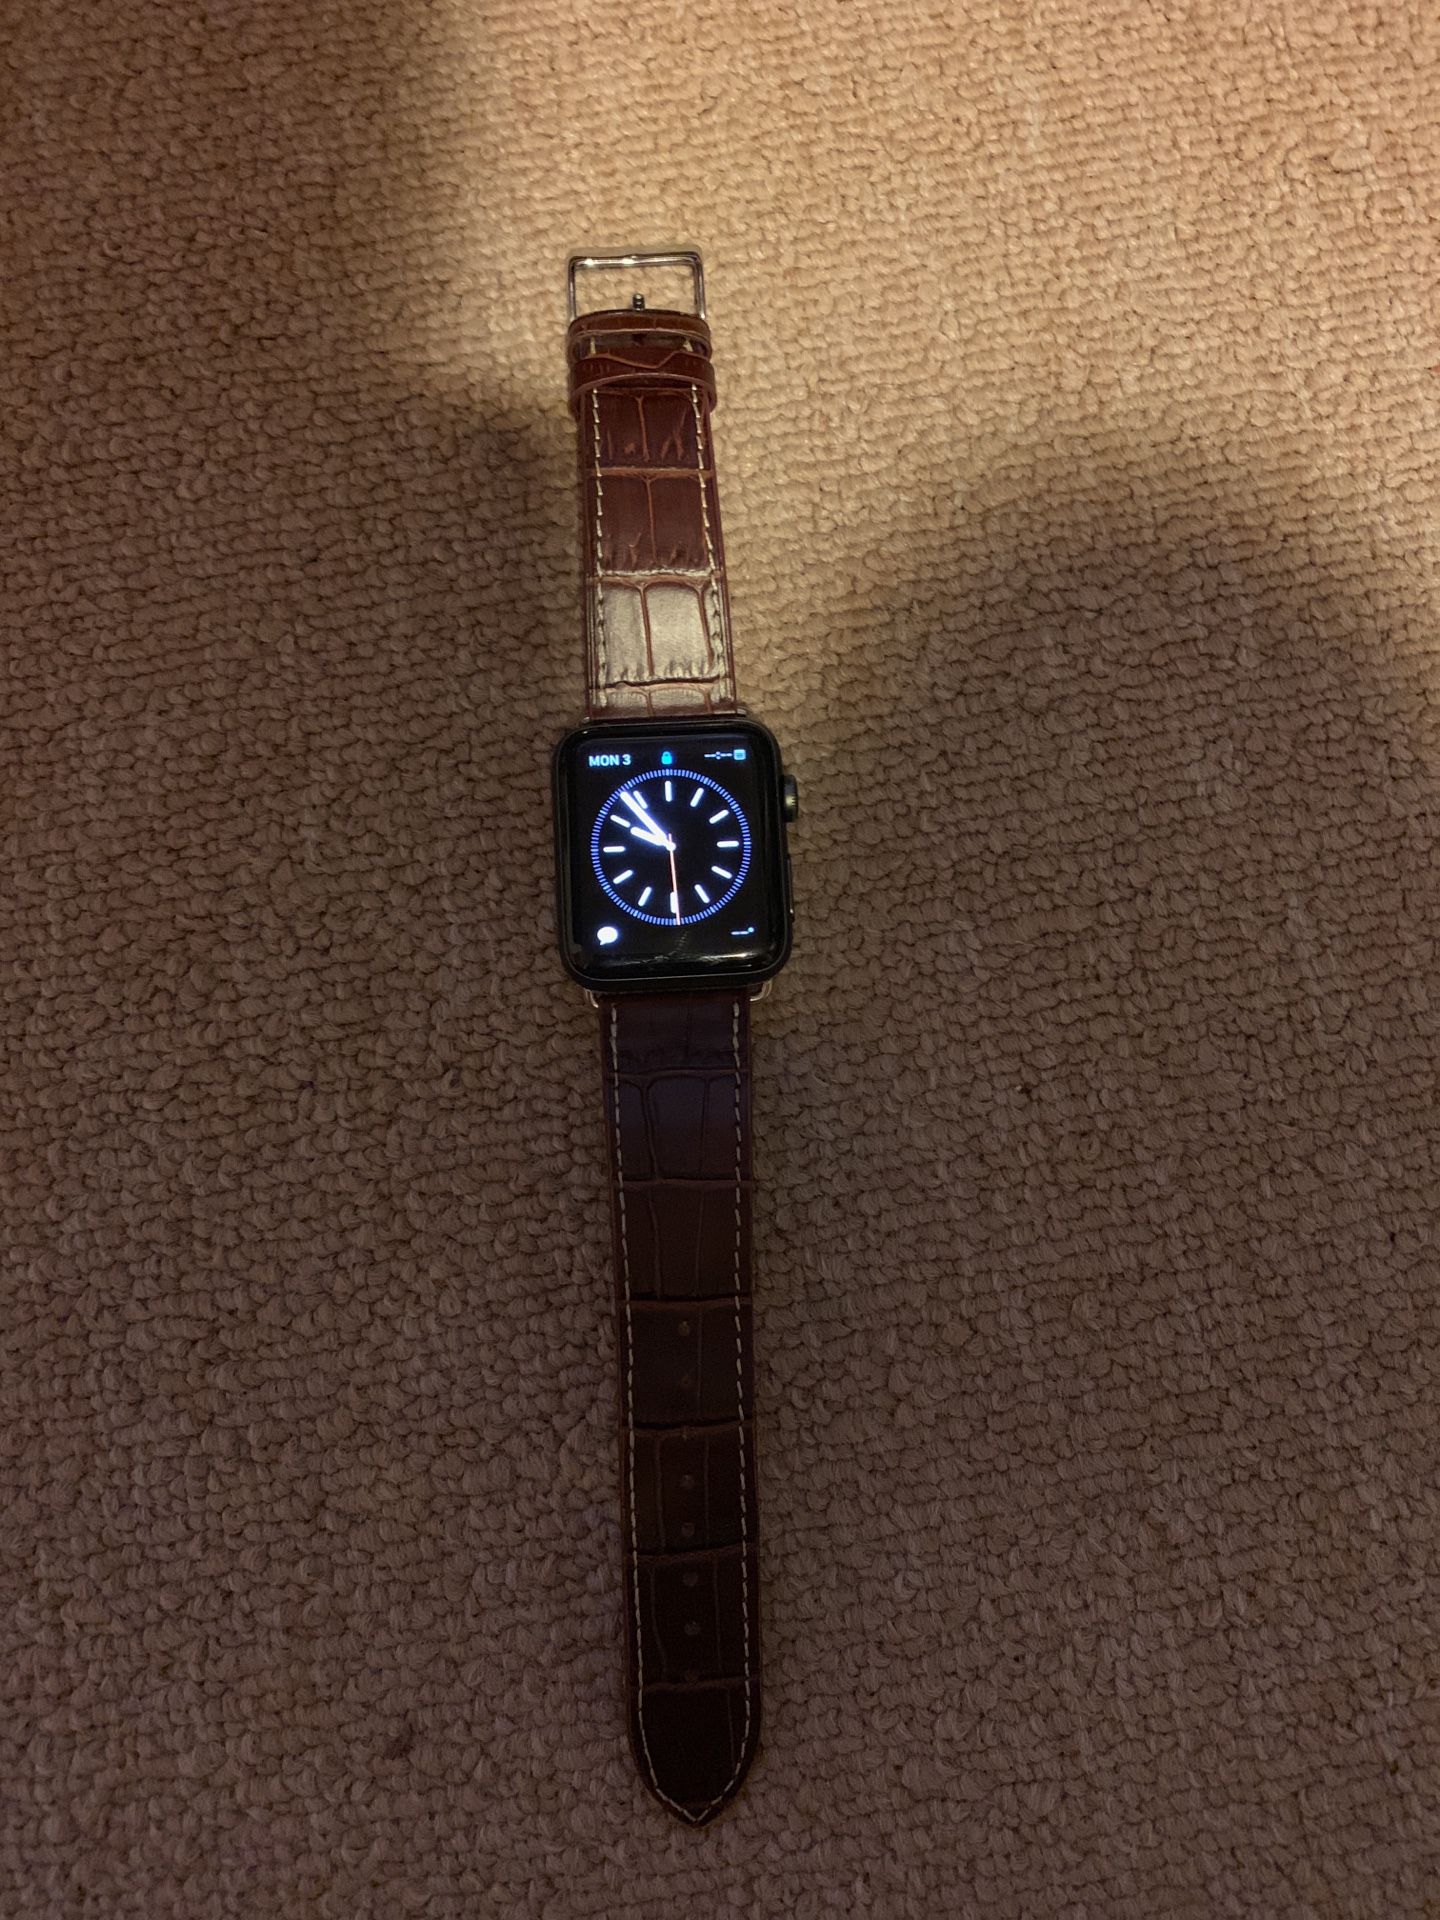 Apple Watch Series 2 42 mm with fitness band